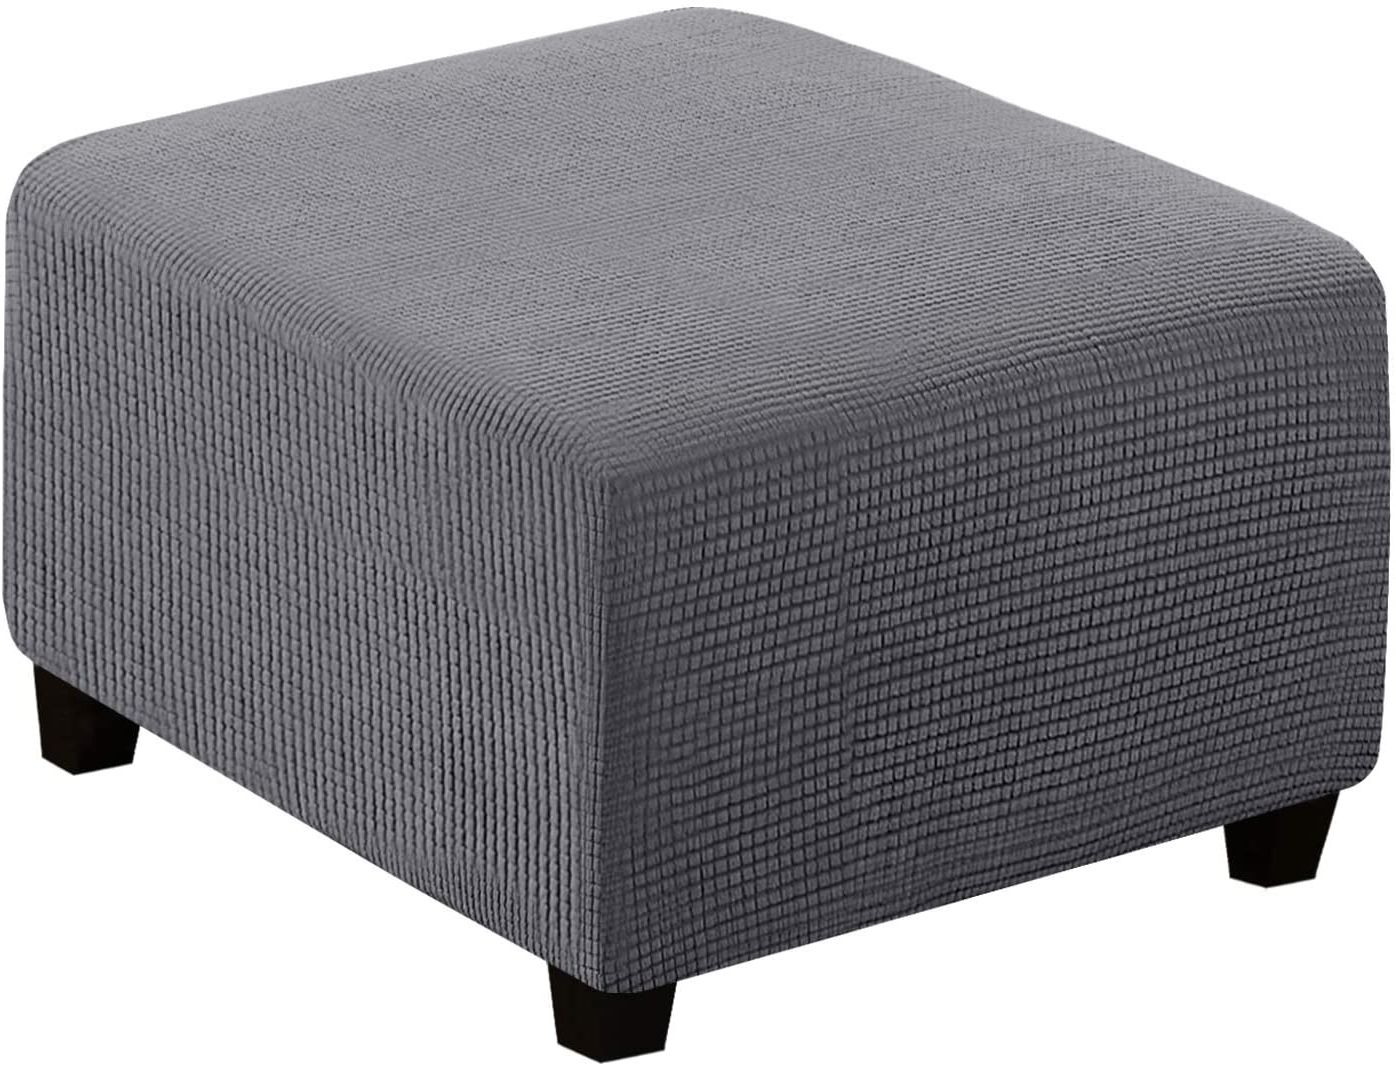 Black Fabric Ottomans With Fringe Trim Regarding Most Current Furniture Stretch High Spandex Small Checks Jacquard Fabric Black (View 5 of 10)